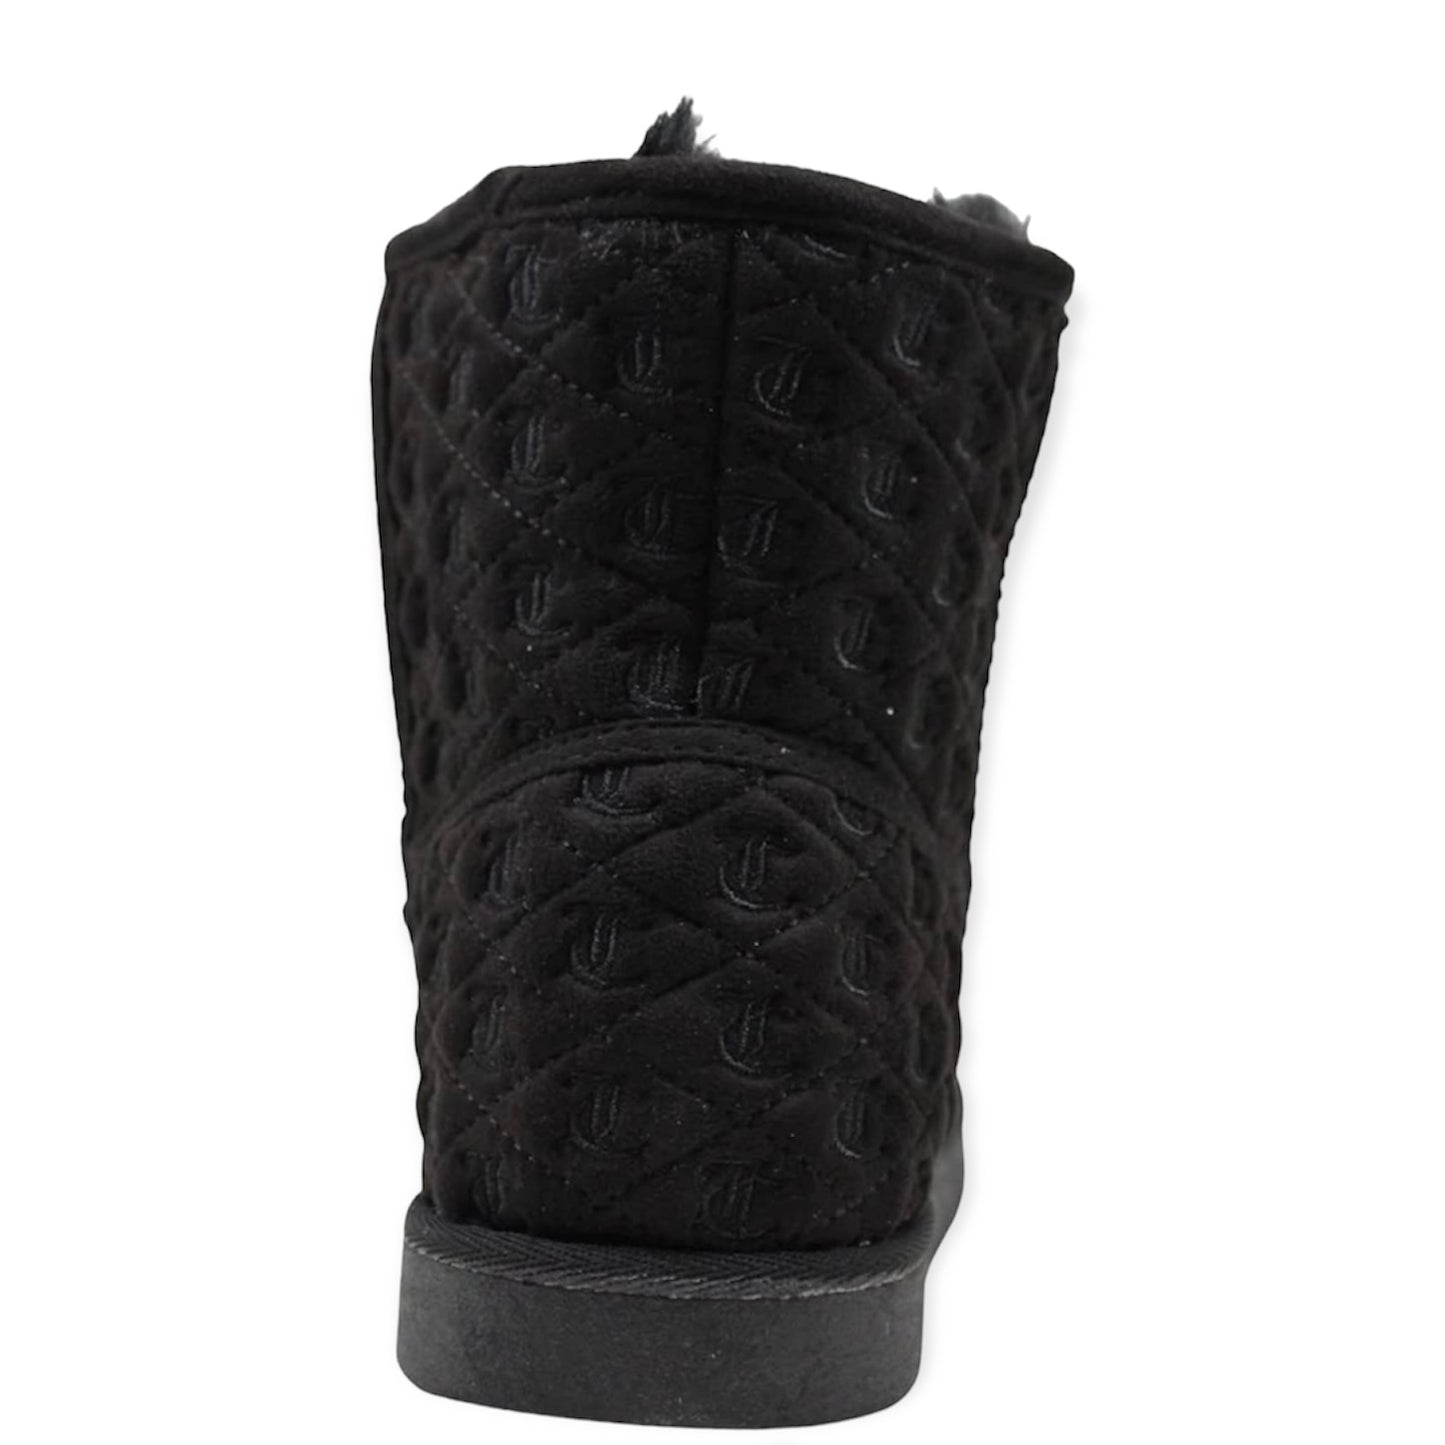 KAVE Winter Boot Black Women's Shoes